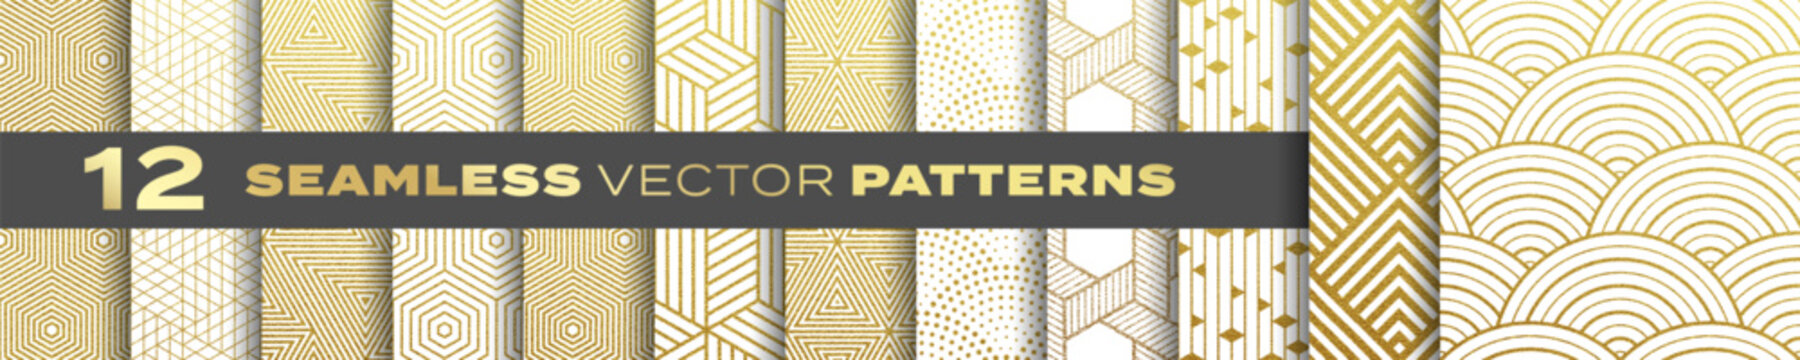 Seamless gold patterns vector set, abstract geometric shape backgrounds. Creative design golden patterns with retro, modern, trendy texture